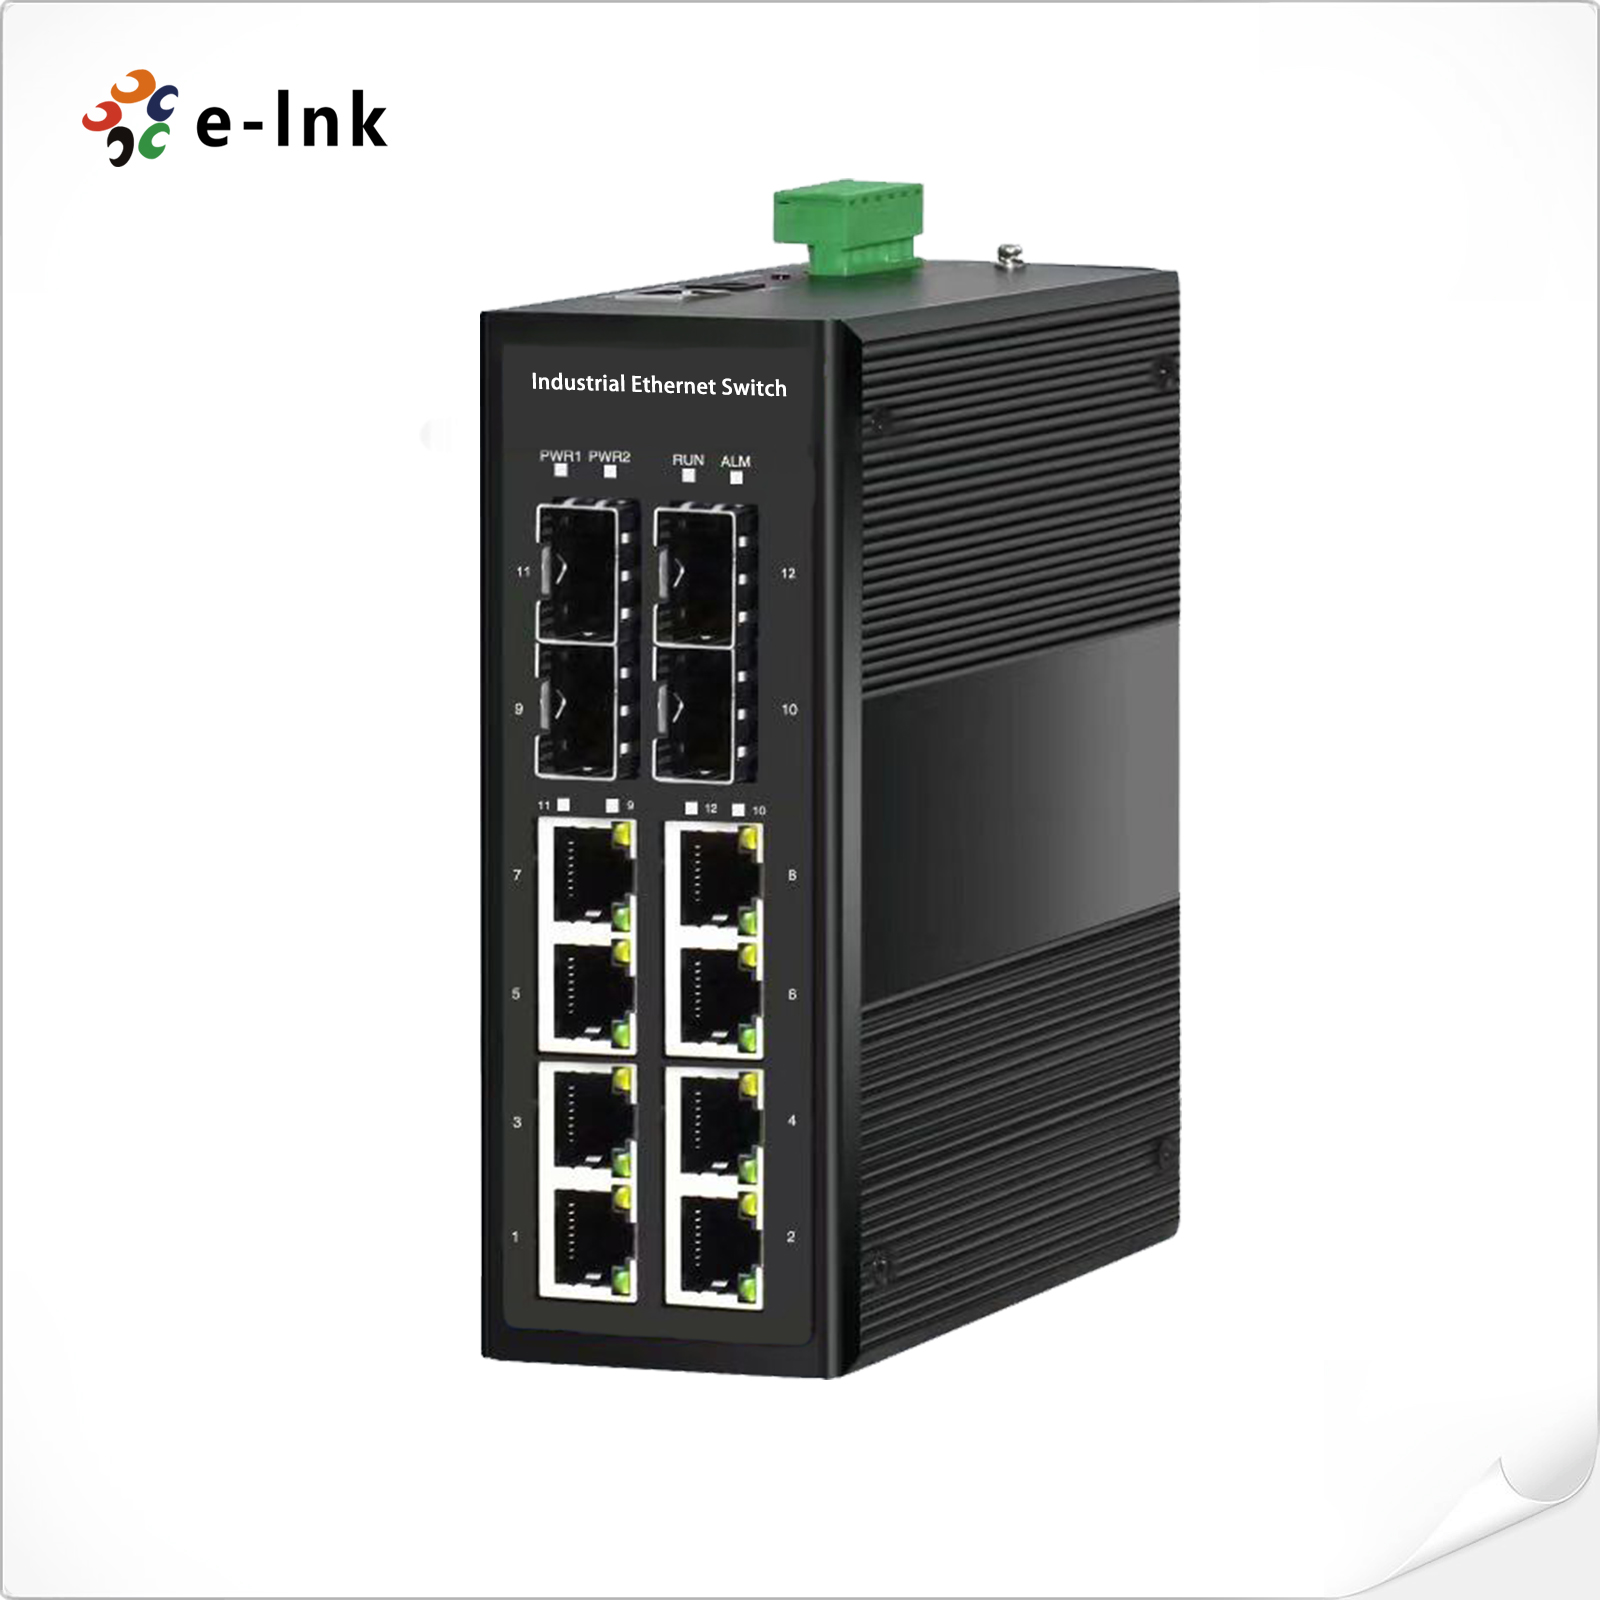 Industrial 8-port 10/100/1000T 802.3at PoE + 4-port 100/1000X SFP Managed Ethernet Switch